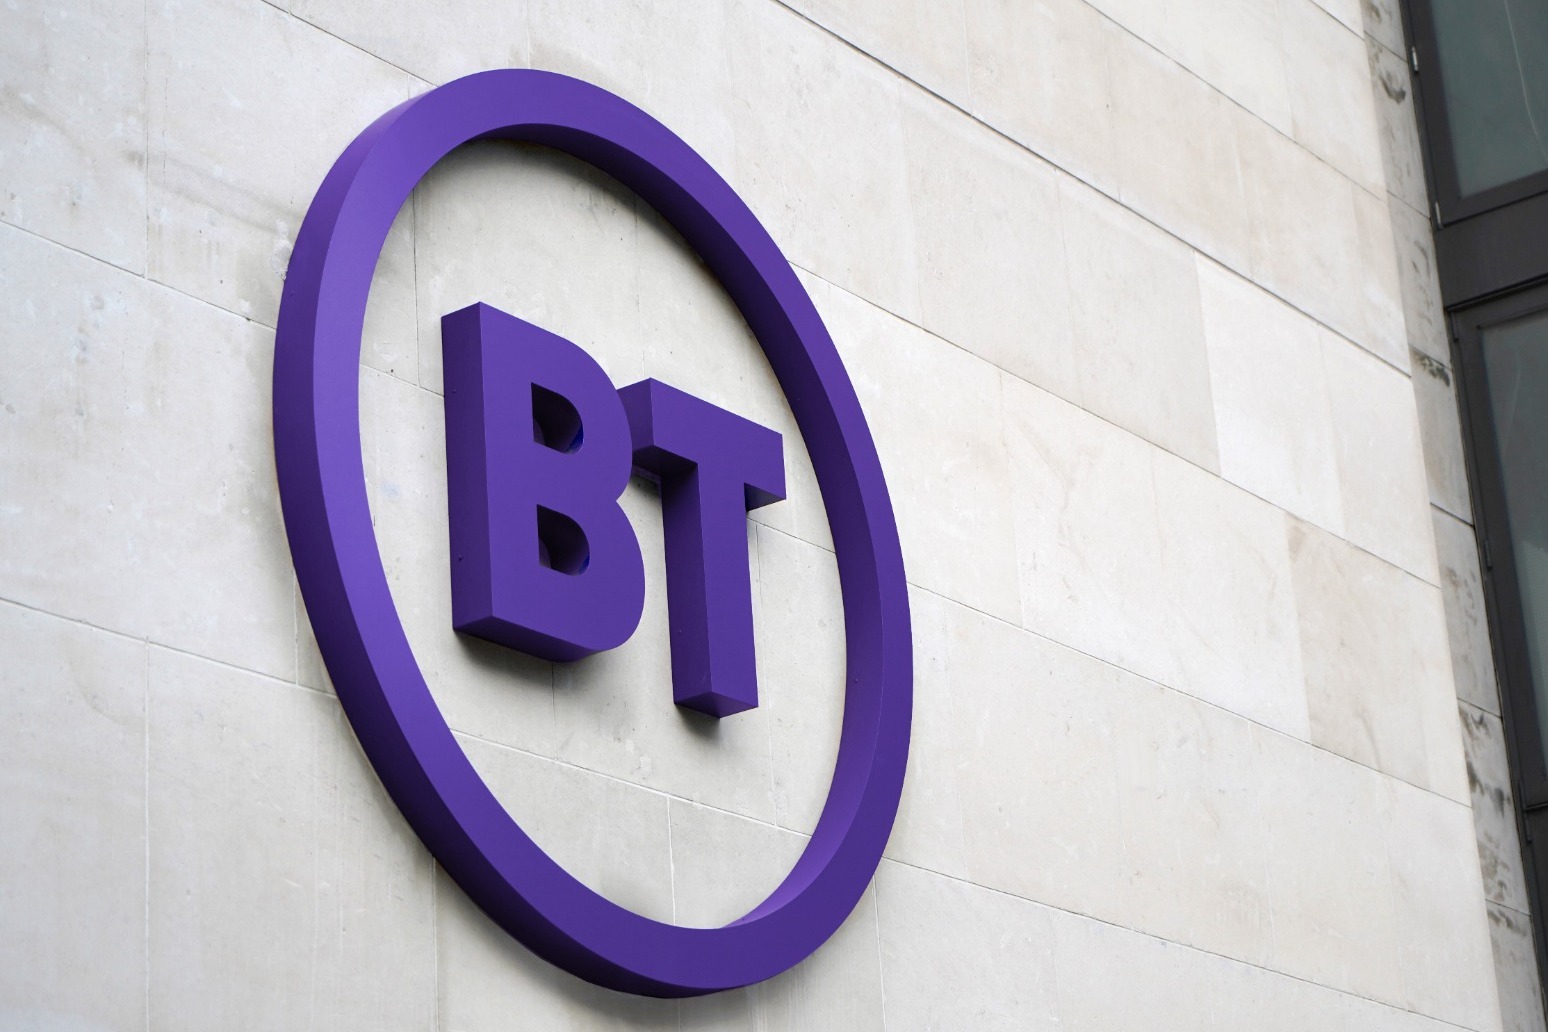 999 call service workers to join fresh strikes at BT and Openreach 